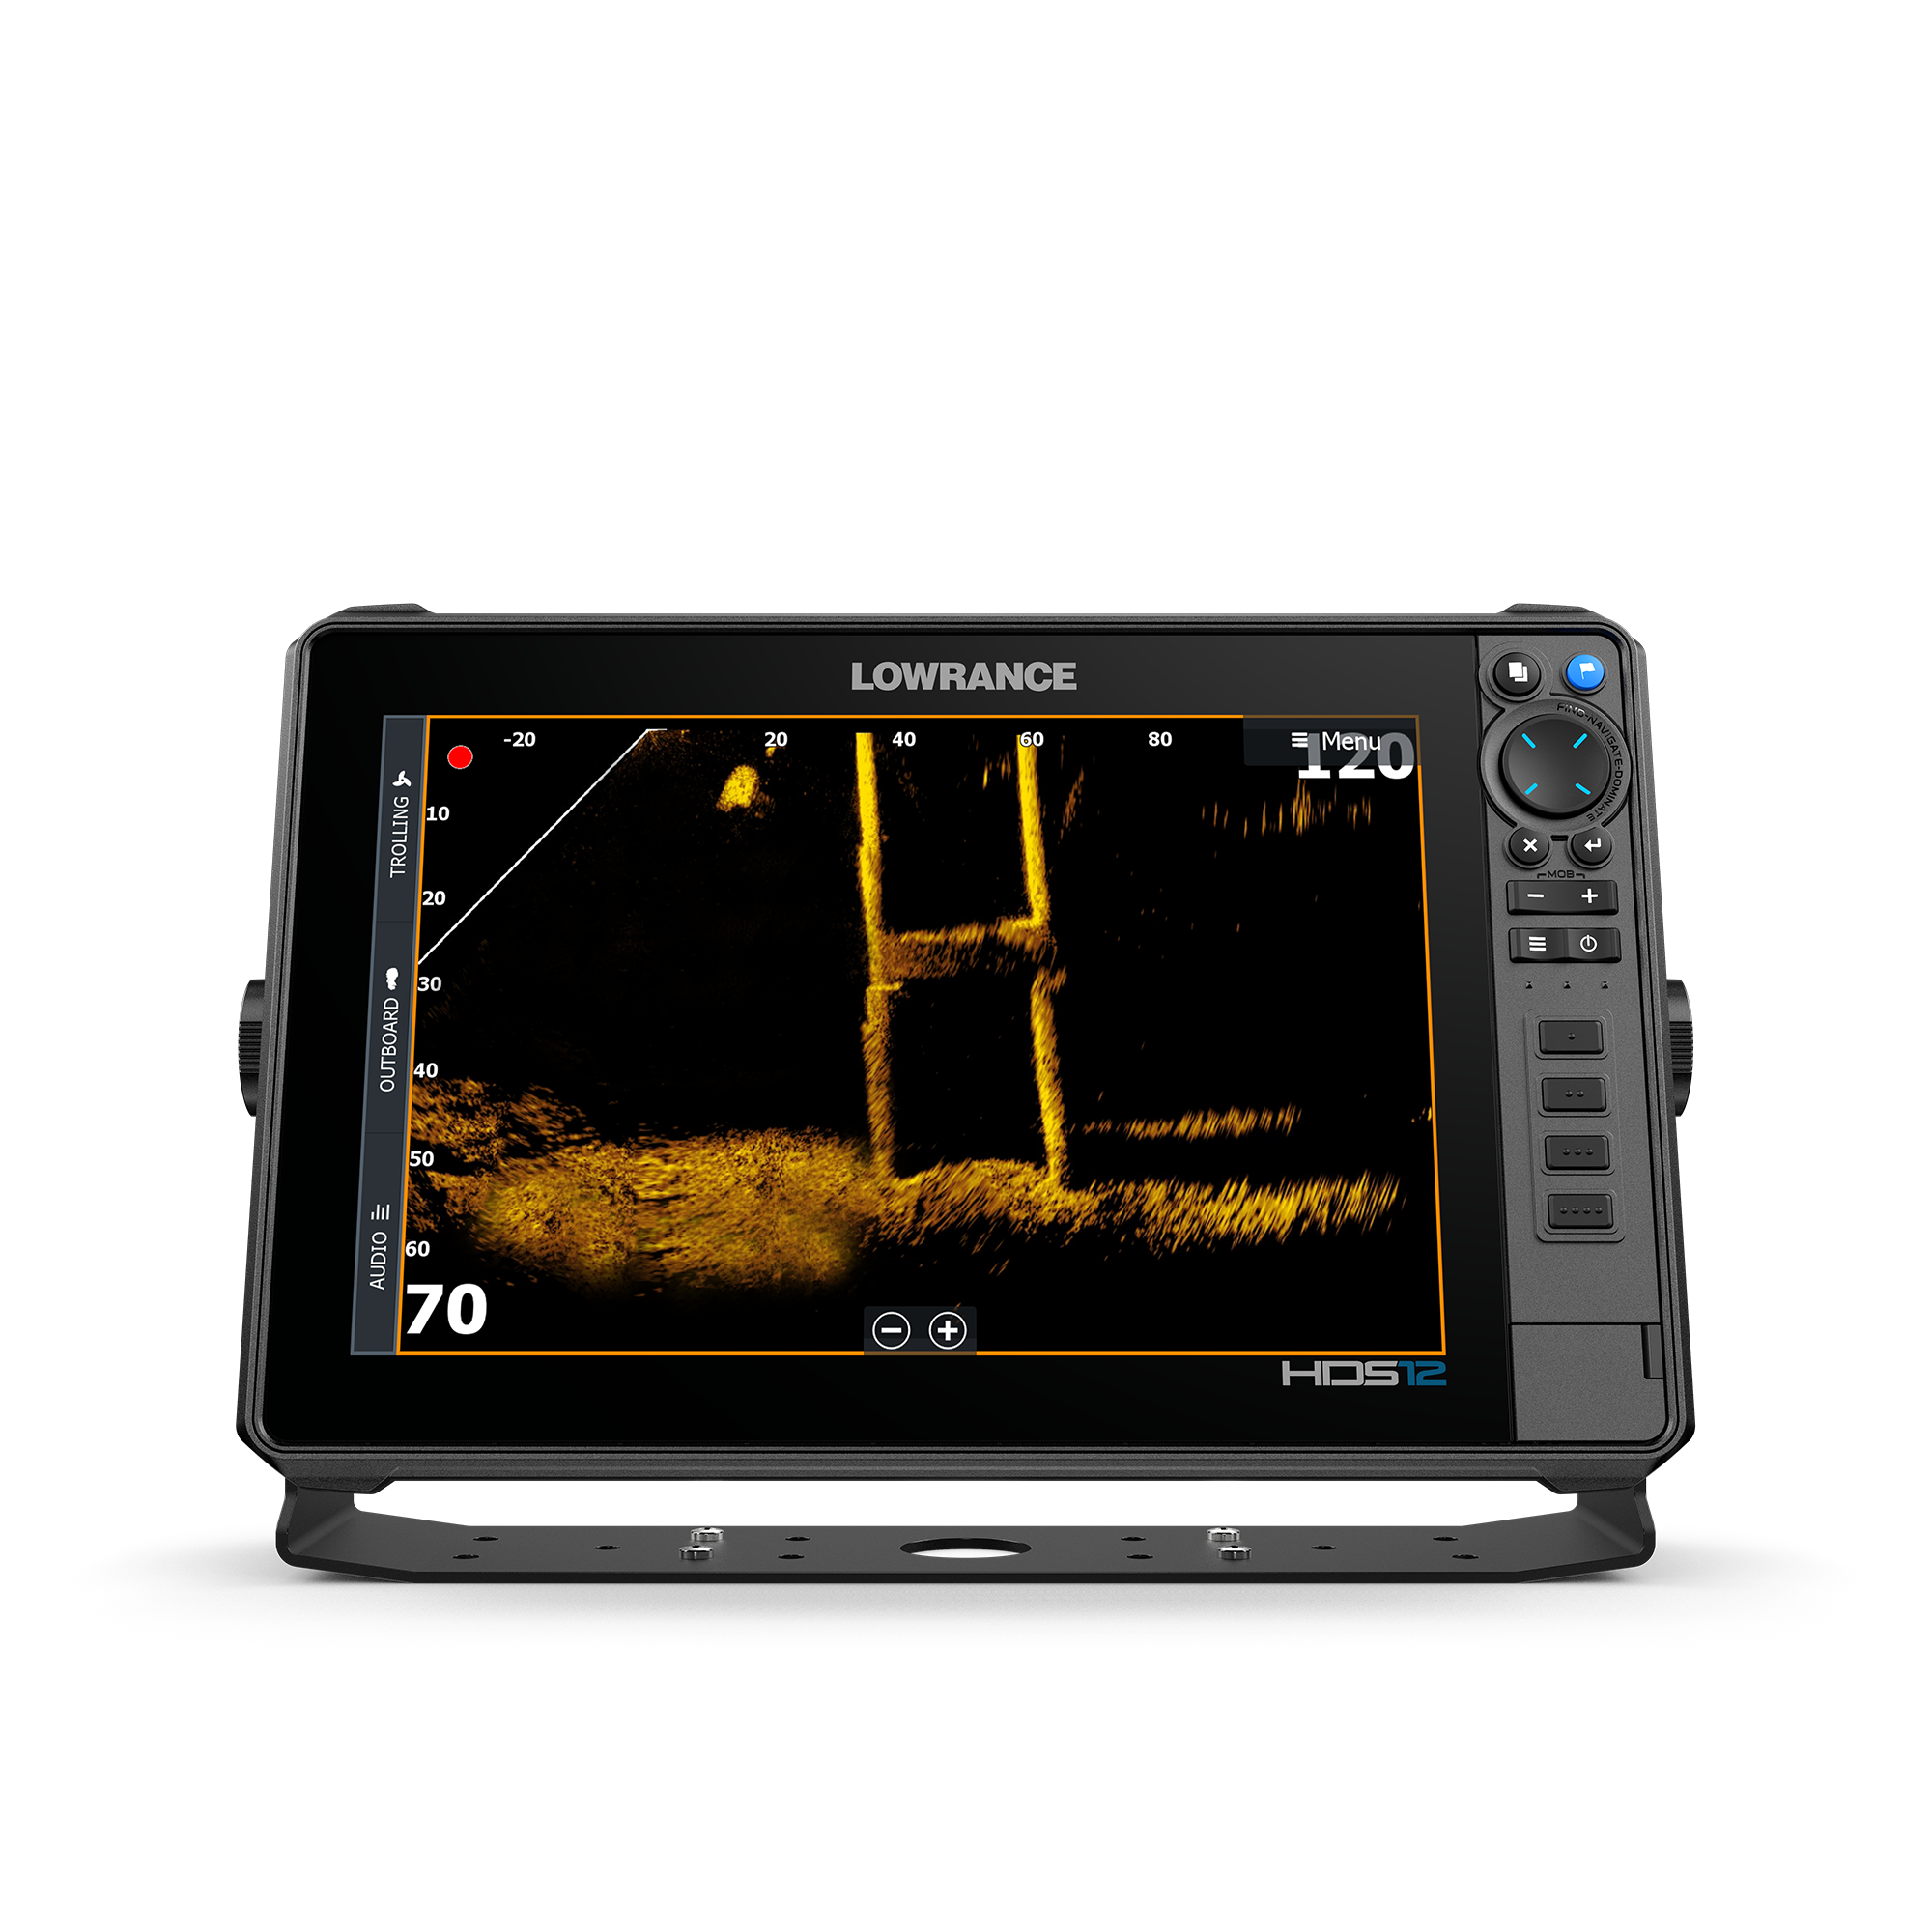 How to Install a microSD Card into a Lowrance® HDS® Gen3 